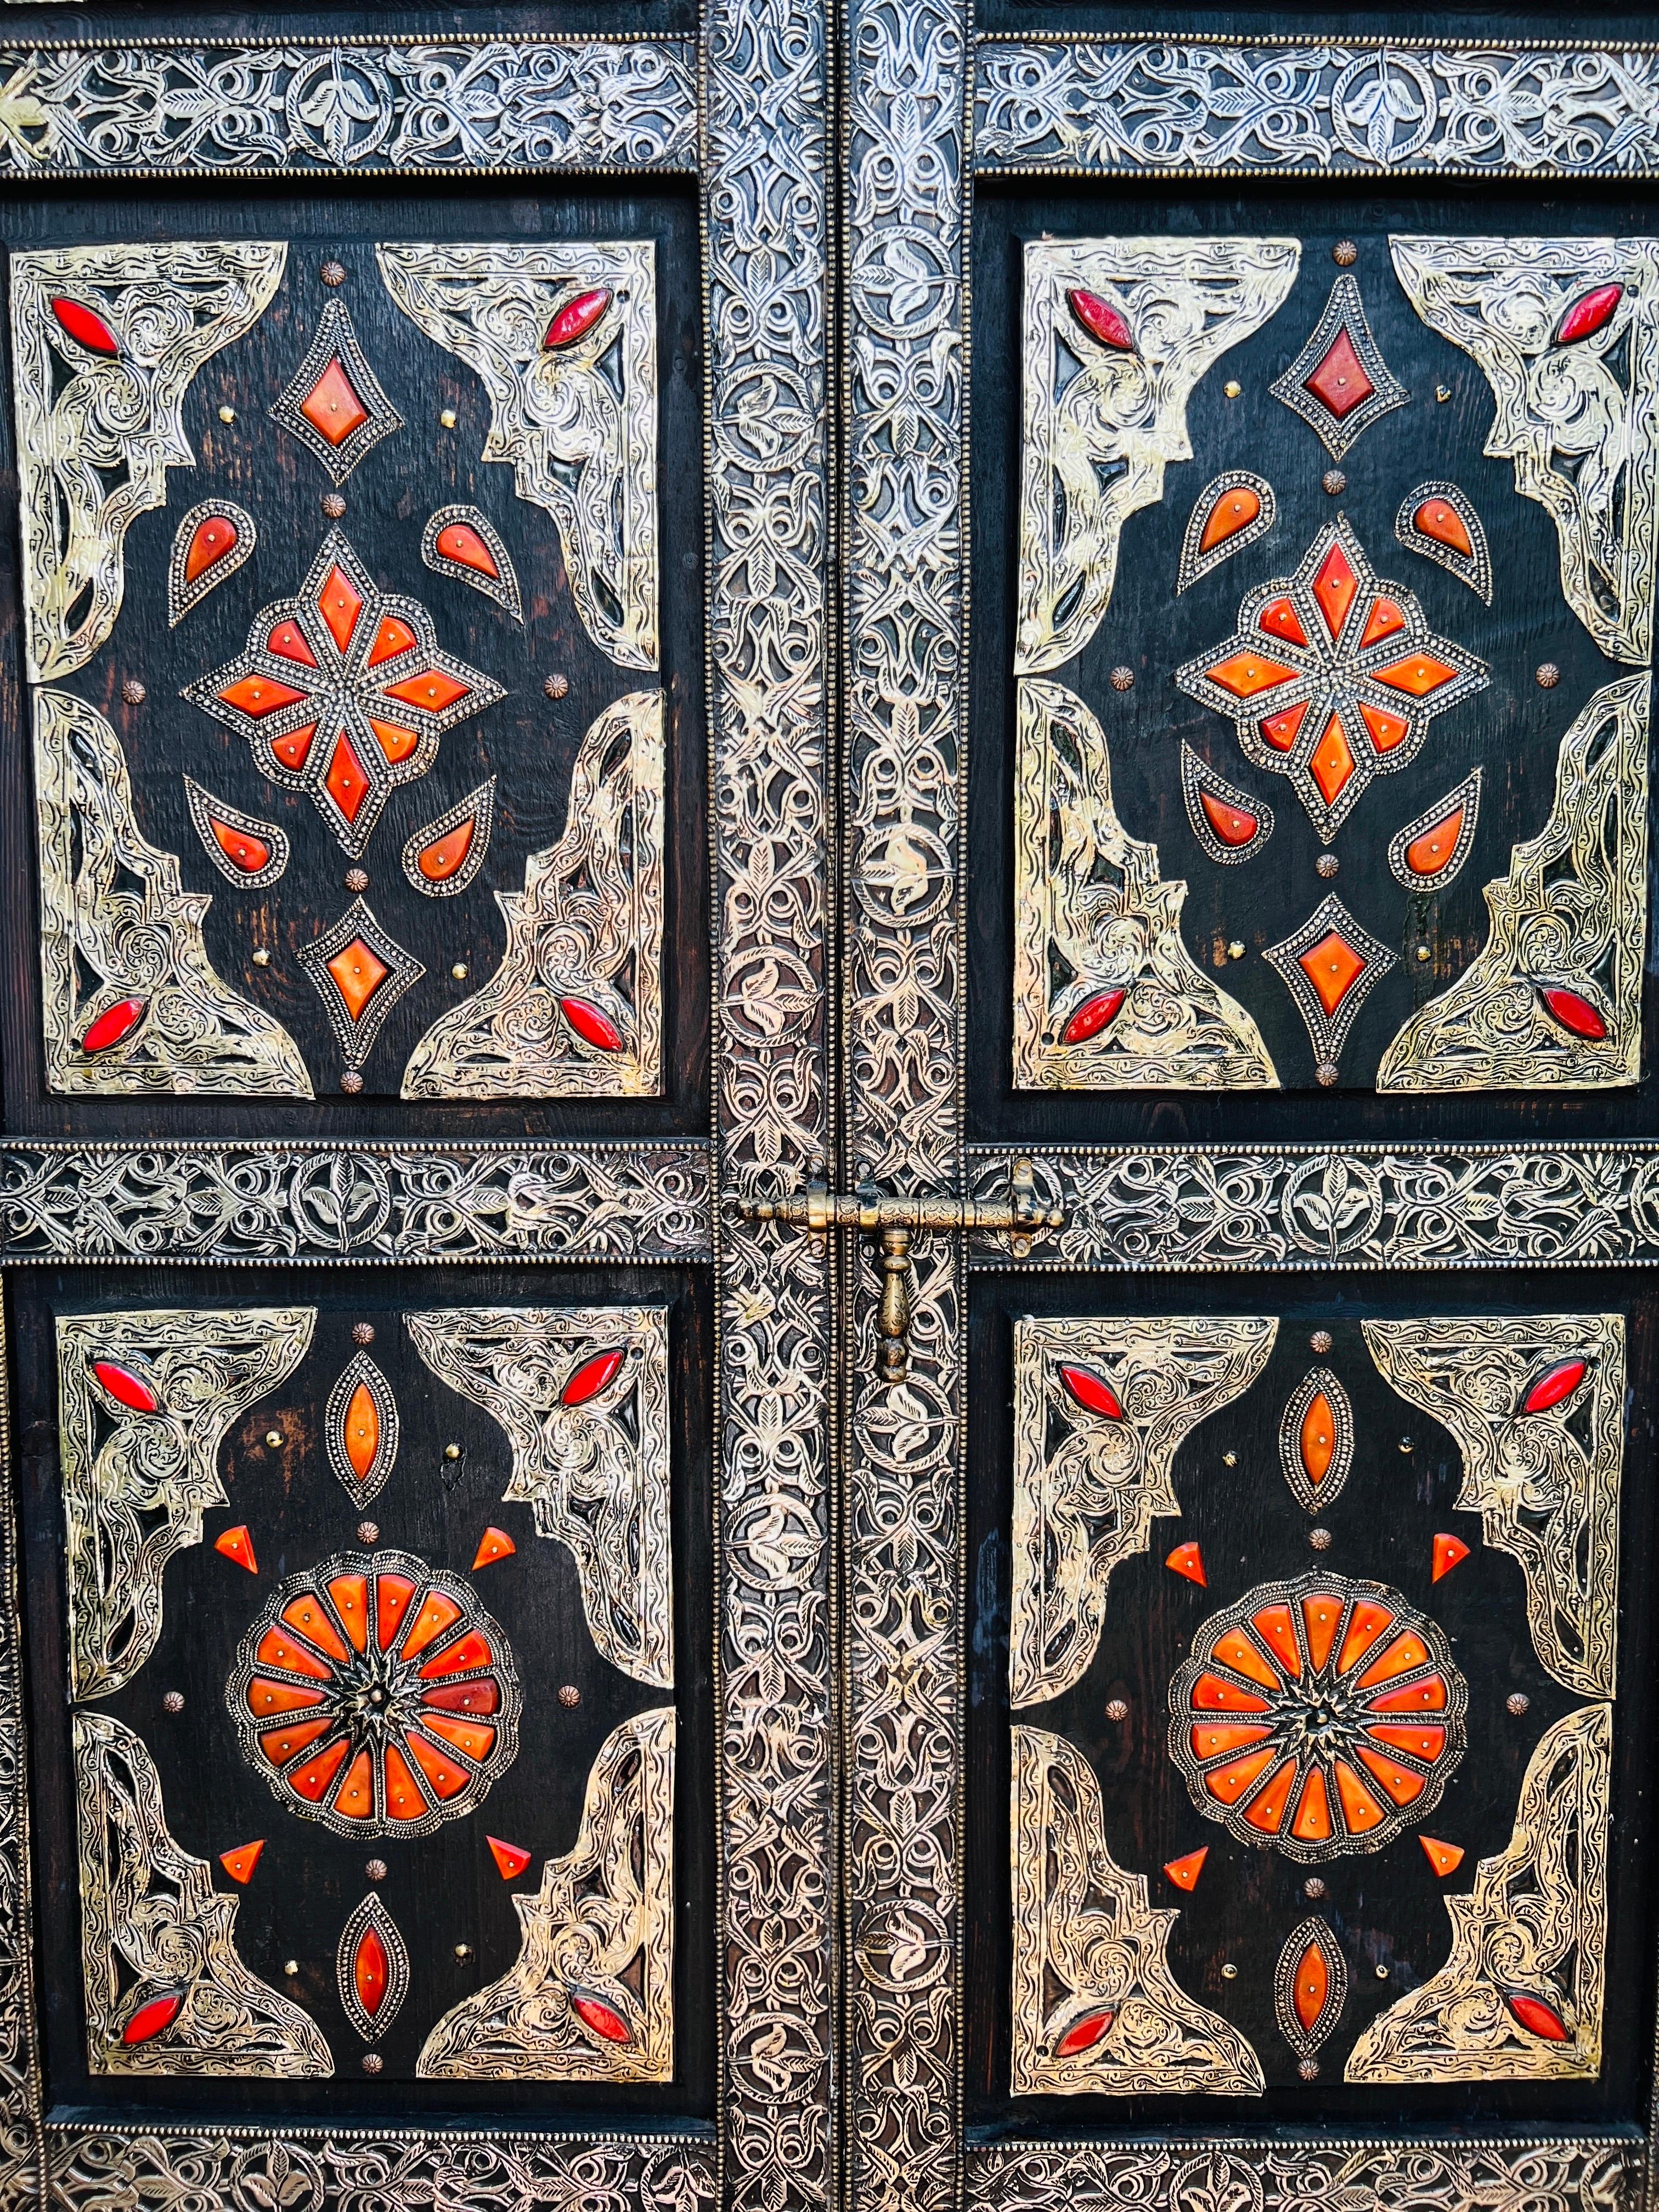 Hand-Painted Moroccan Double Doors with Silver Overlay, Bone Inlays, & Stained Glass, c. 1960 For Sale